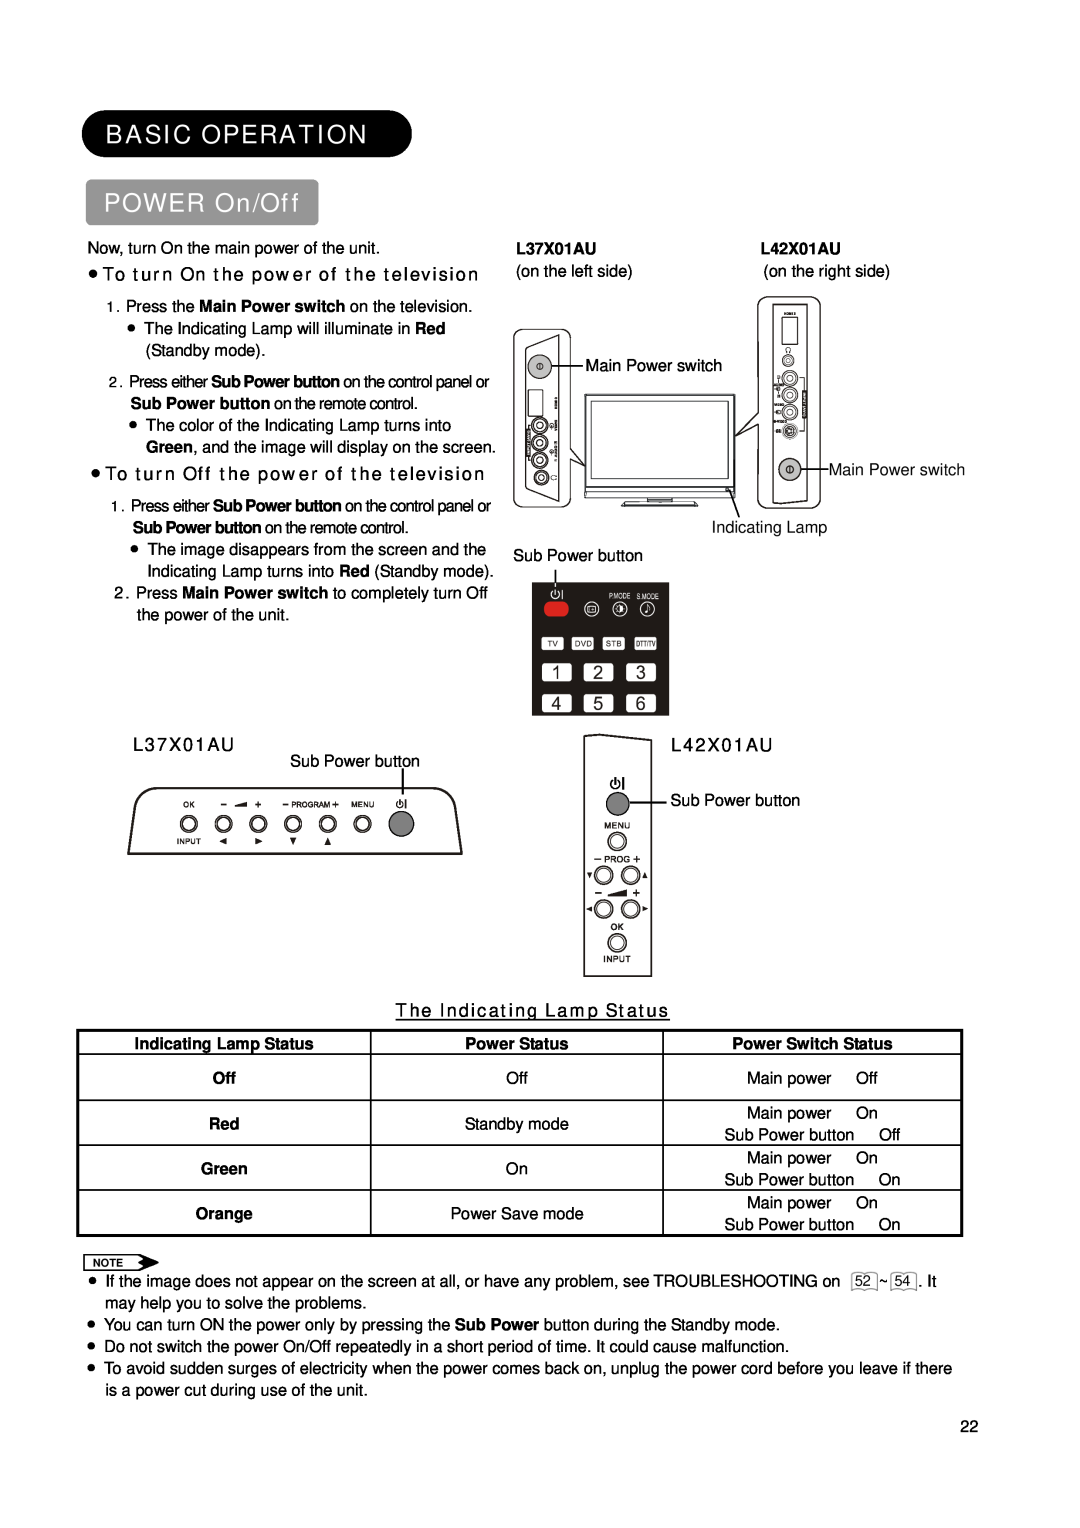 Hitachi L42X01AU manual BASIC OPERATION POWER On/Off, Ⴠ To turn On the power of the television, The Indicating Lamp Status 